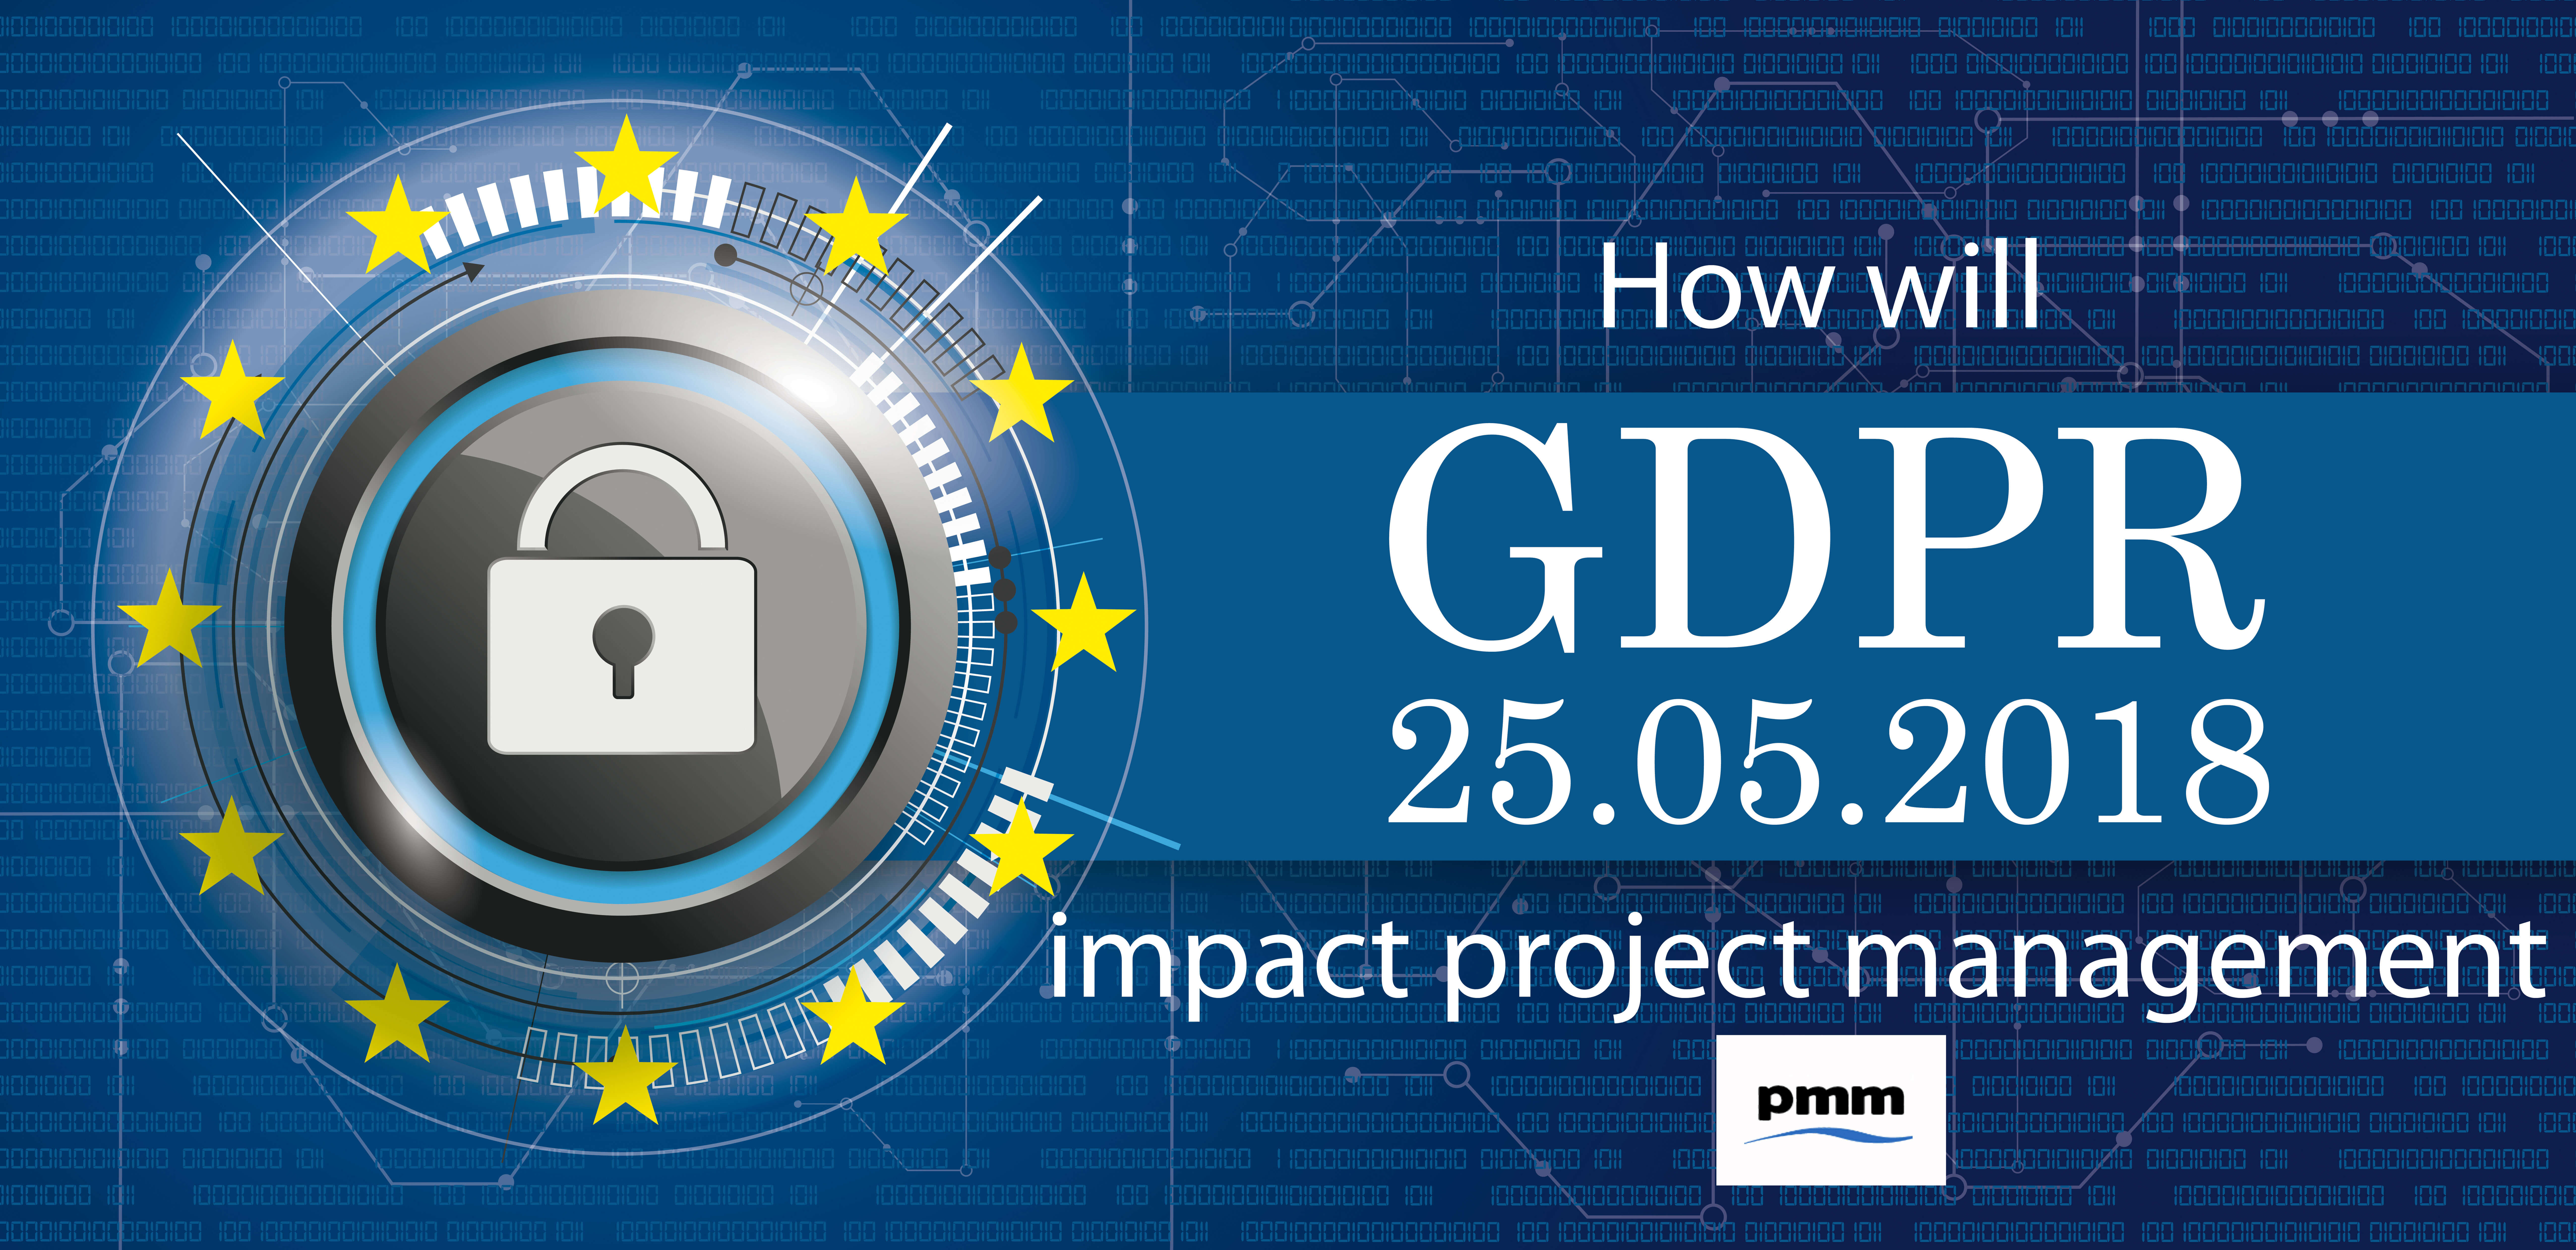 How will GDPR impact project management?